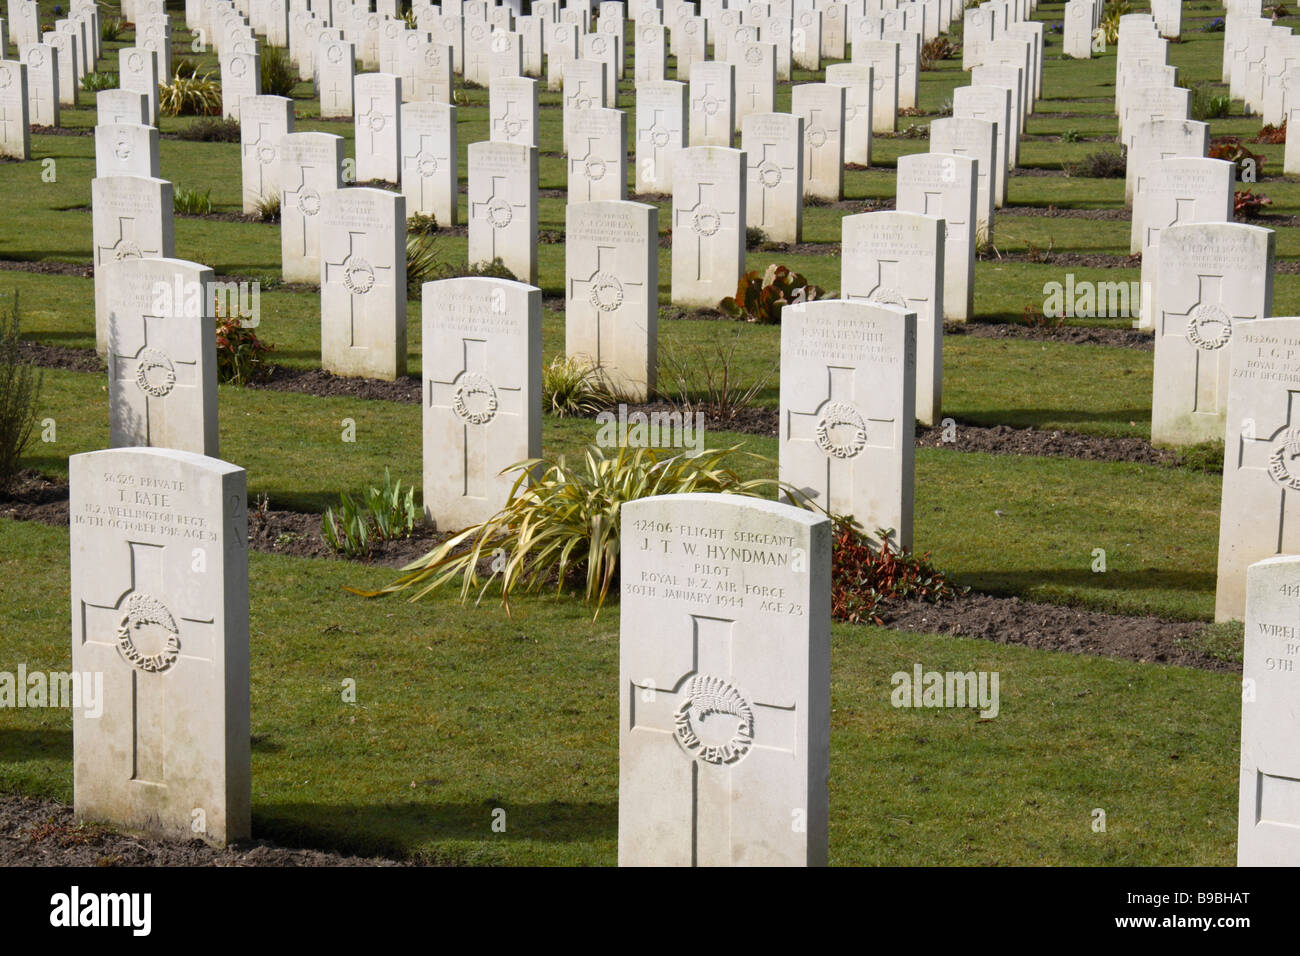 A view over British headstones in the Brookwood Military Cemetery, Woking. Stock Photo